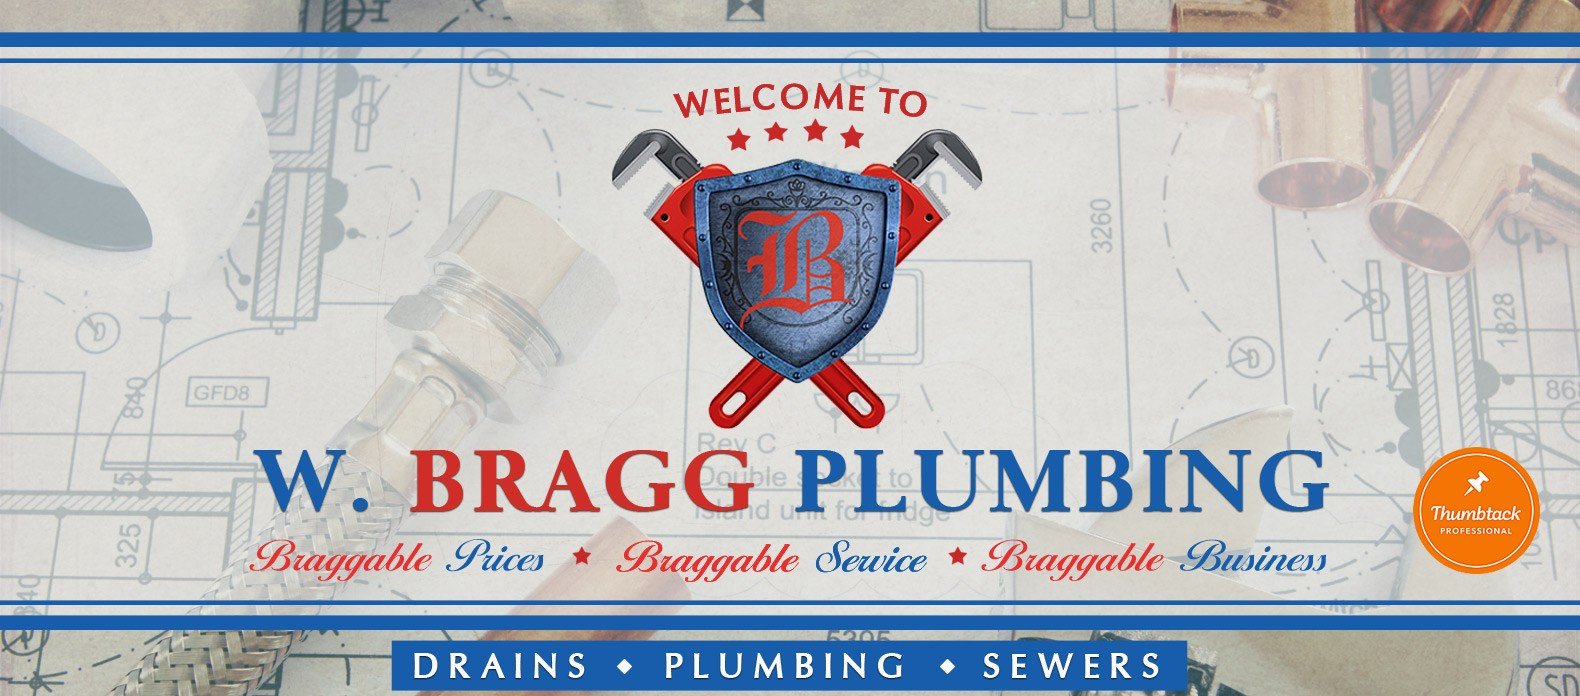 Learn more about W. Bragg Plumbing, Sewer and Drain and our commercial and residential services